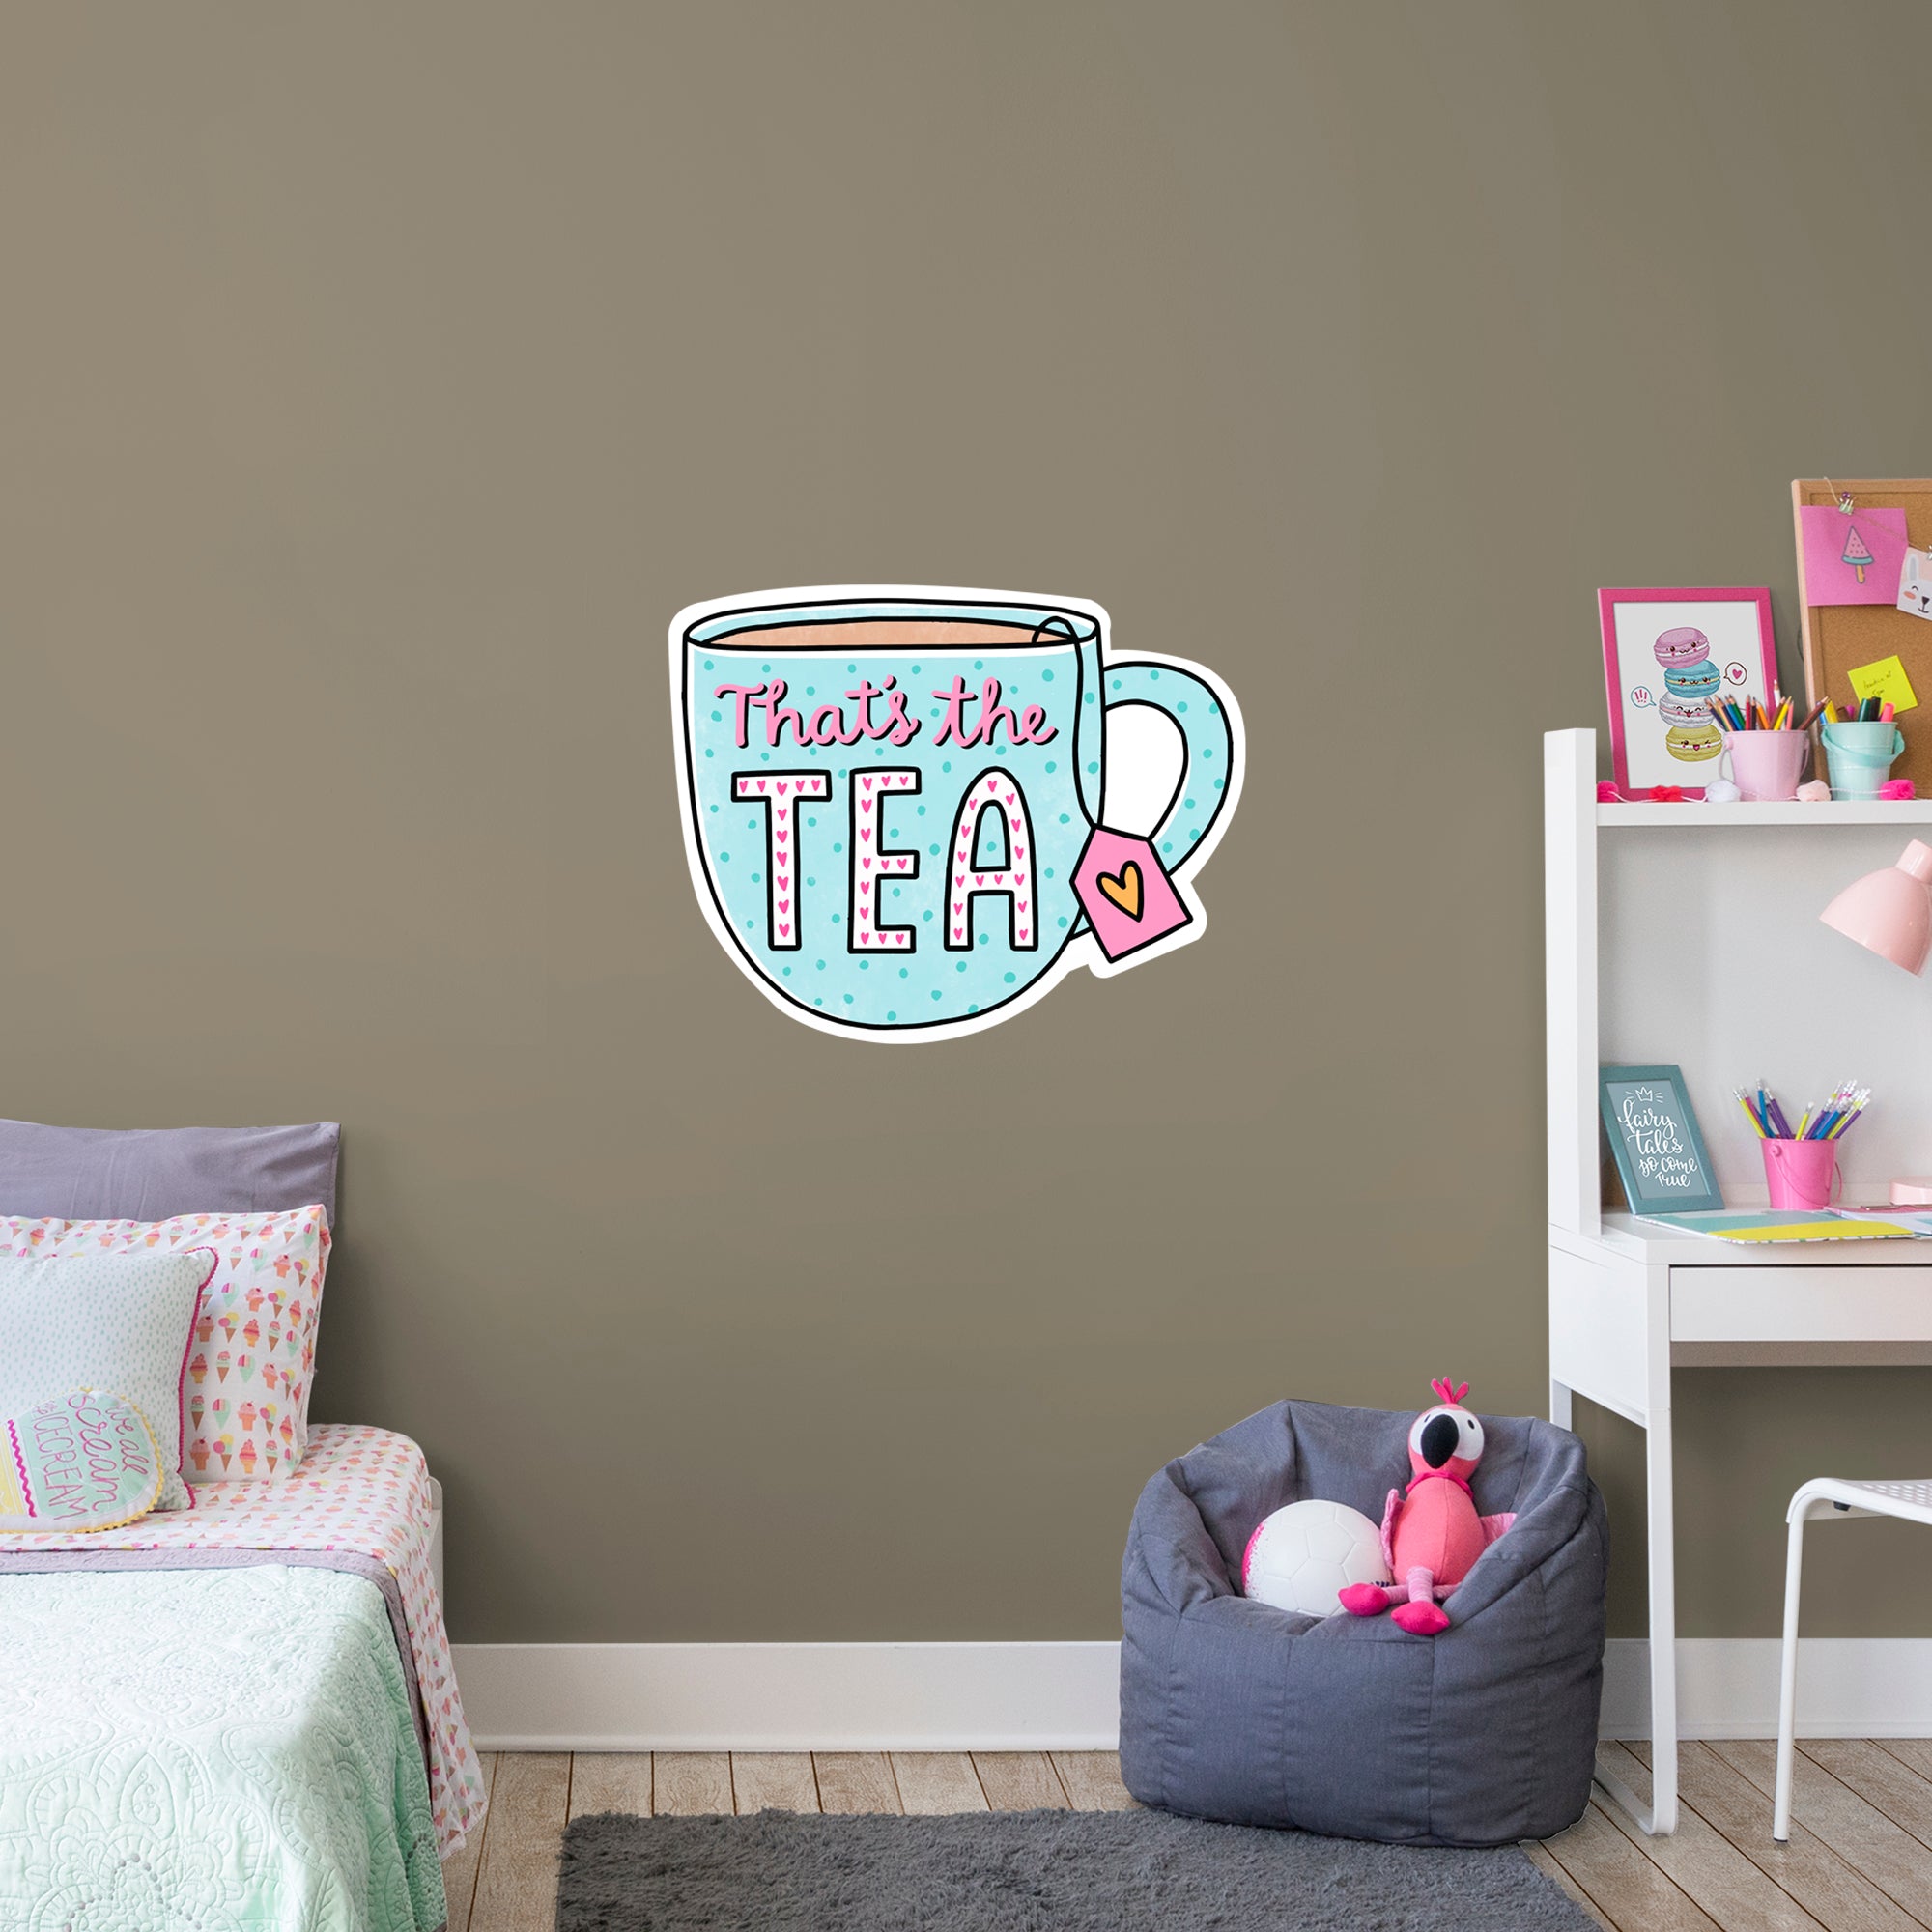 Thats The Tea - Officially Licensed Big Moods Removable Wall Decal XL by Fathead | Vinyl